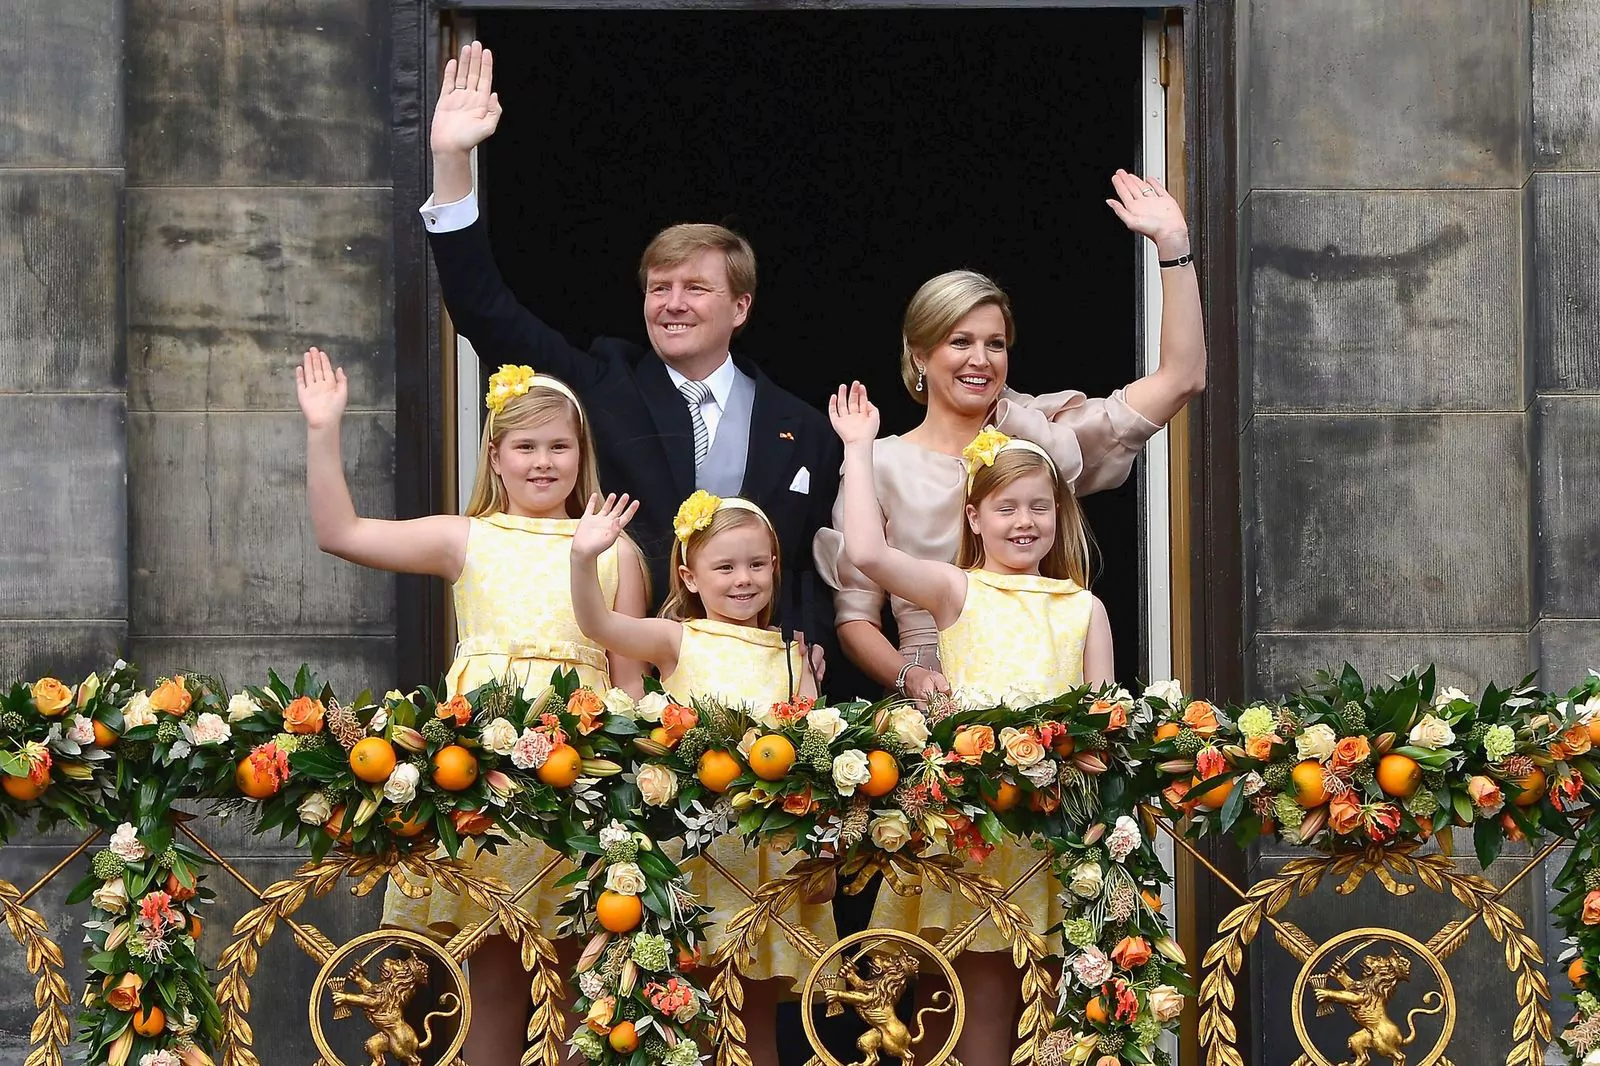 King Willem-Alexander and Queen Maxima with their daughters: Princesses Catharina Amalia, Ariana and Alexia